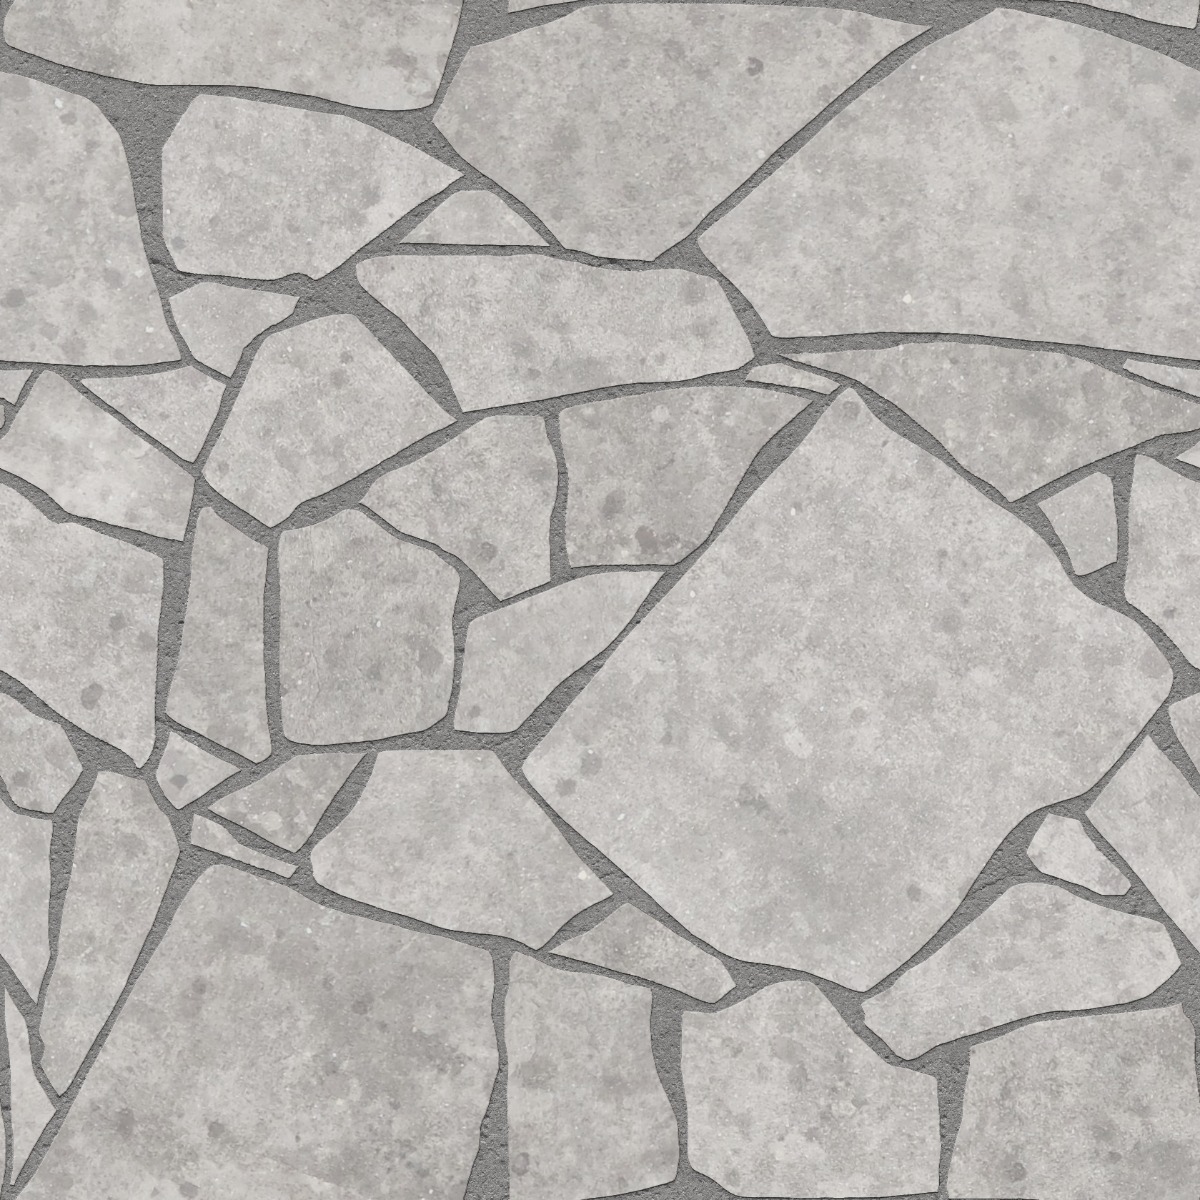 A seamless concrete texture with concrete blocks arranged in a Crazy Paving pattern